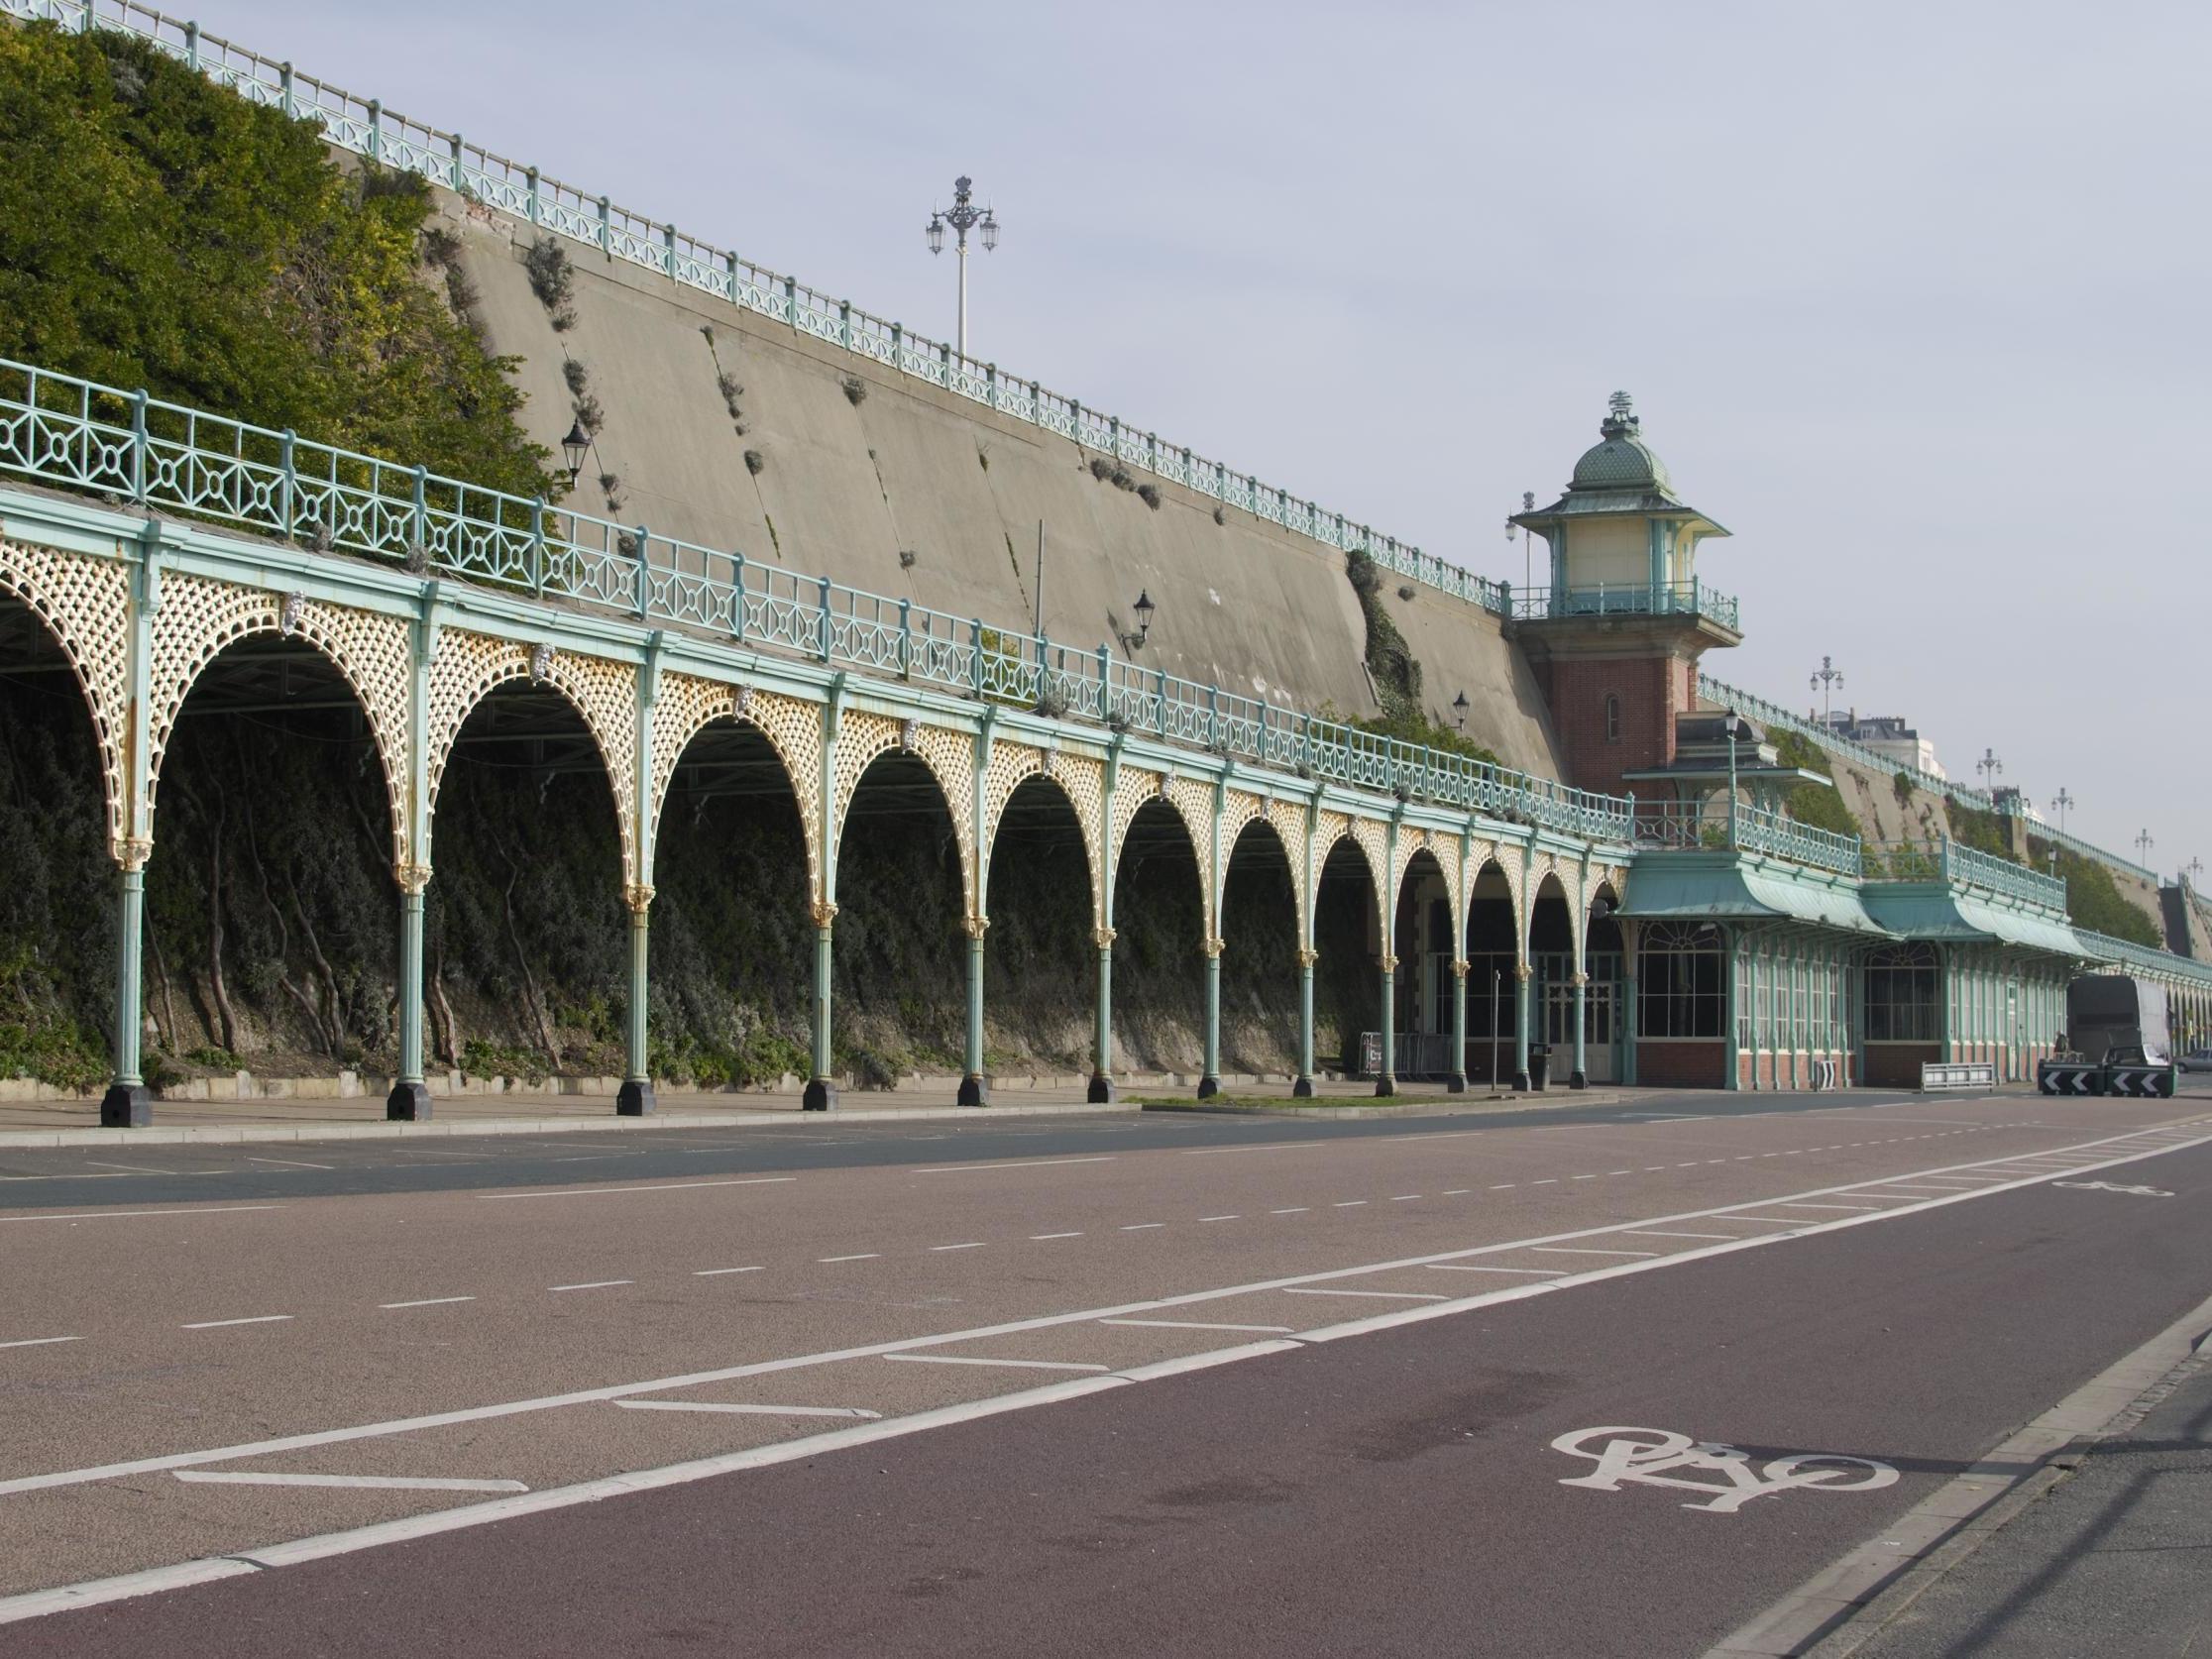 Part of the Madeira Terrace and the Madeira Lift on the Brighton seafront